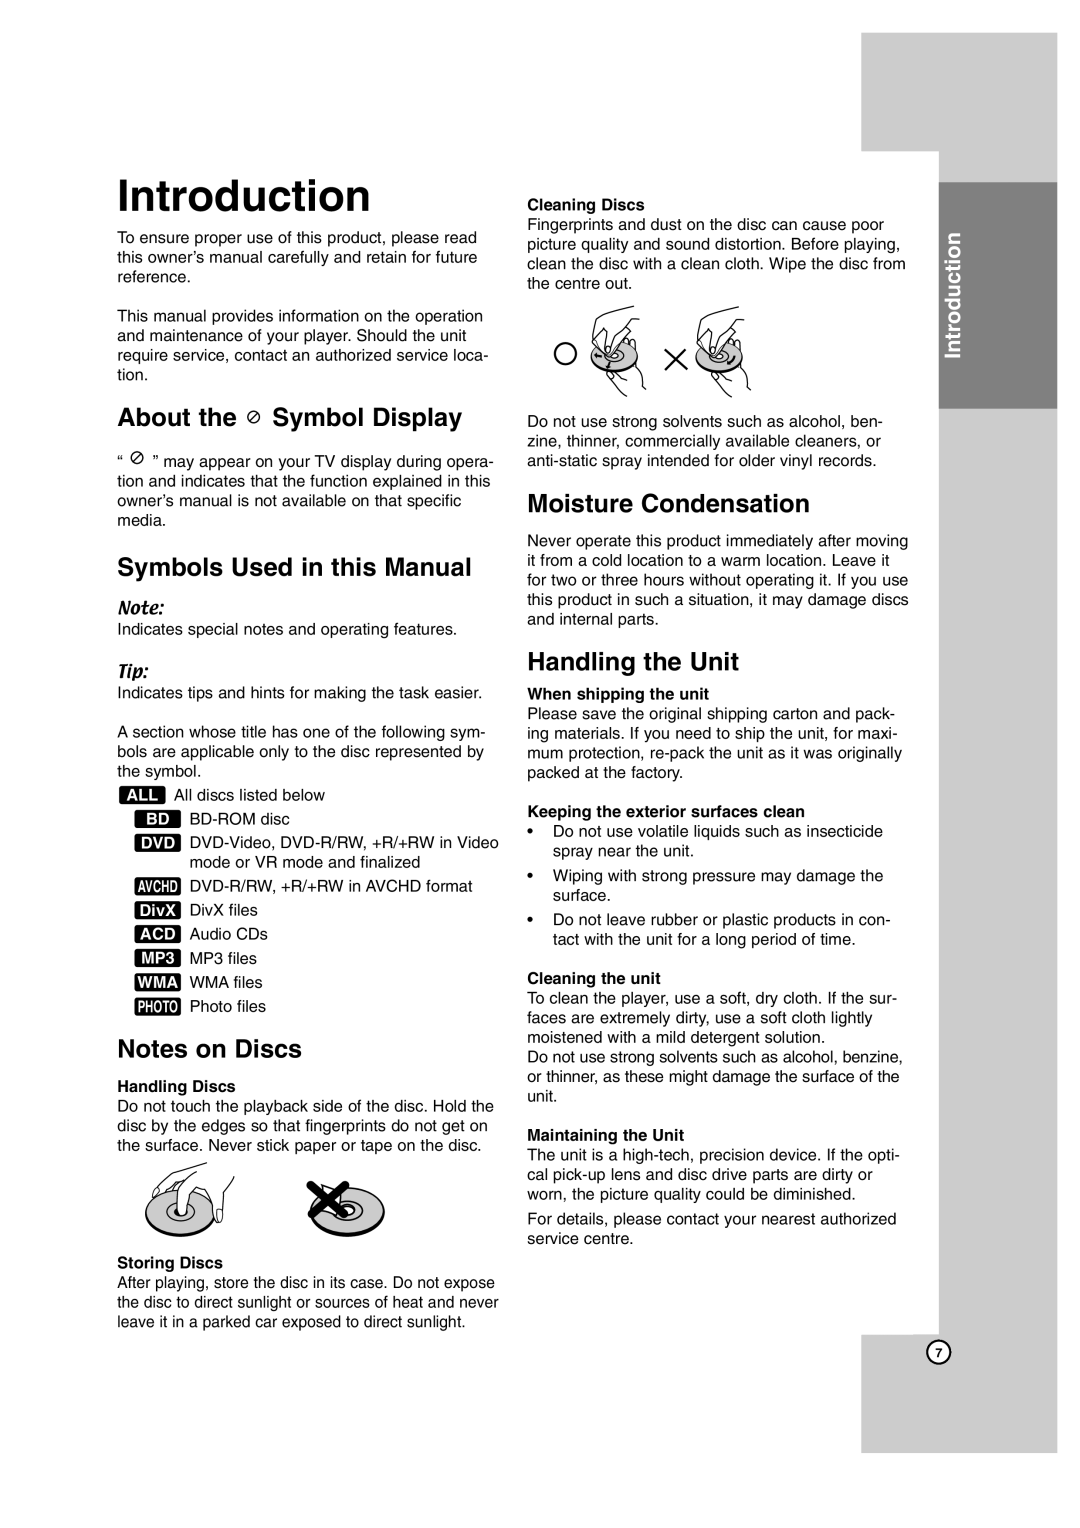 JVC SP-THBD50W Introduction, About the Symbol Display, Symbols Used in this Manual, Notes on Discs, Moisture Condensation 